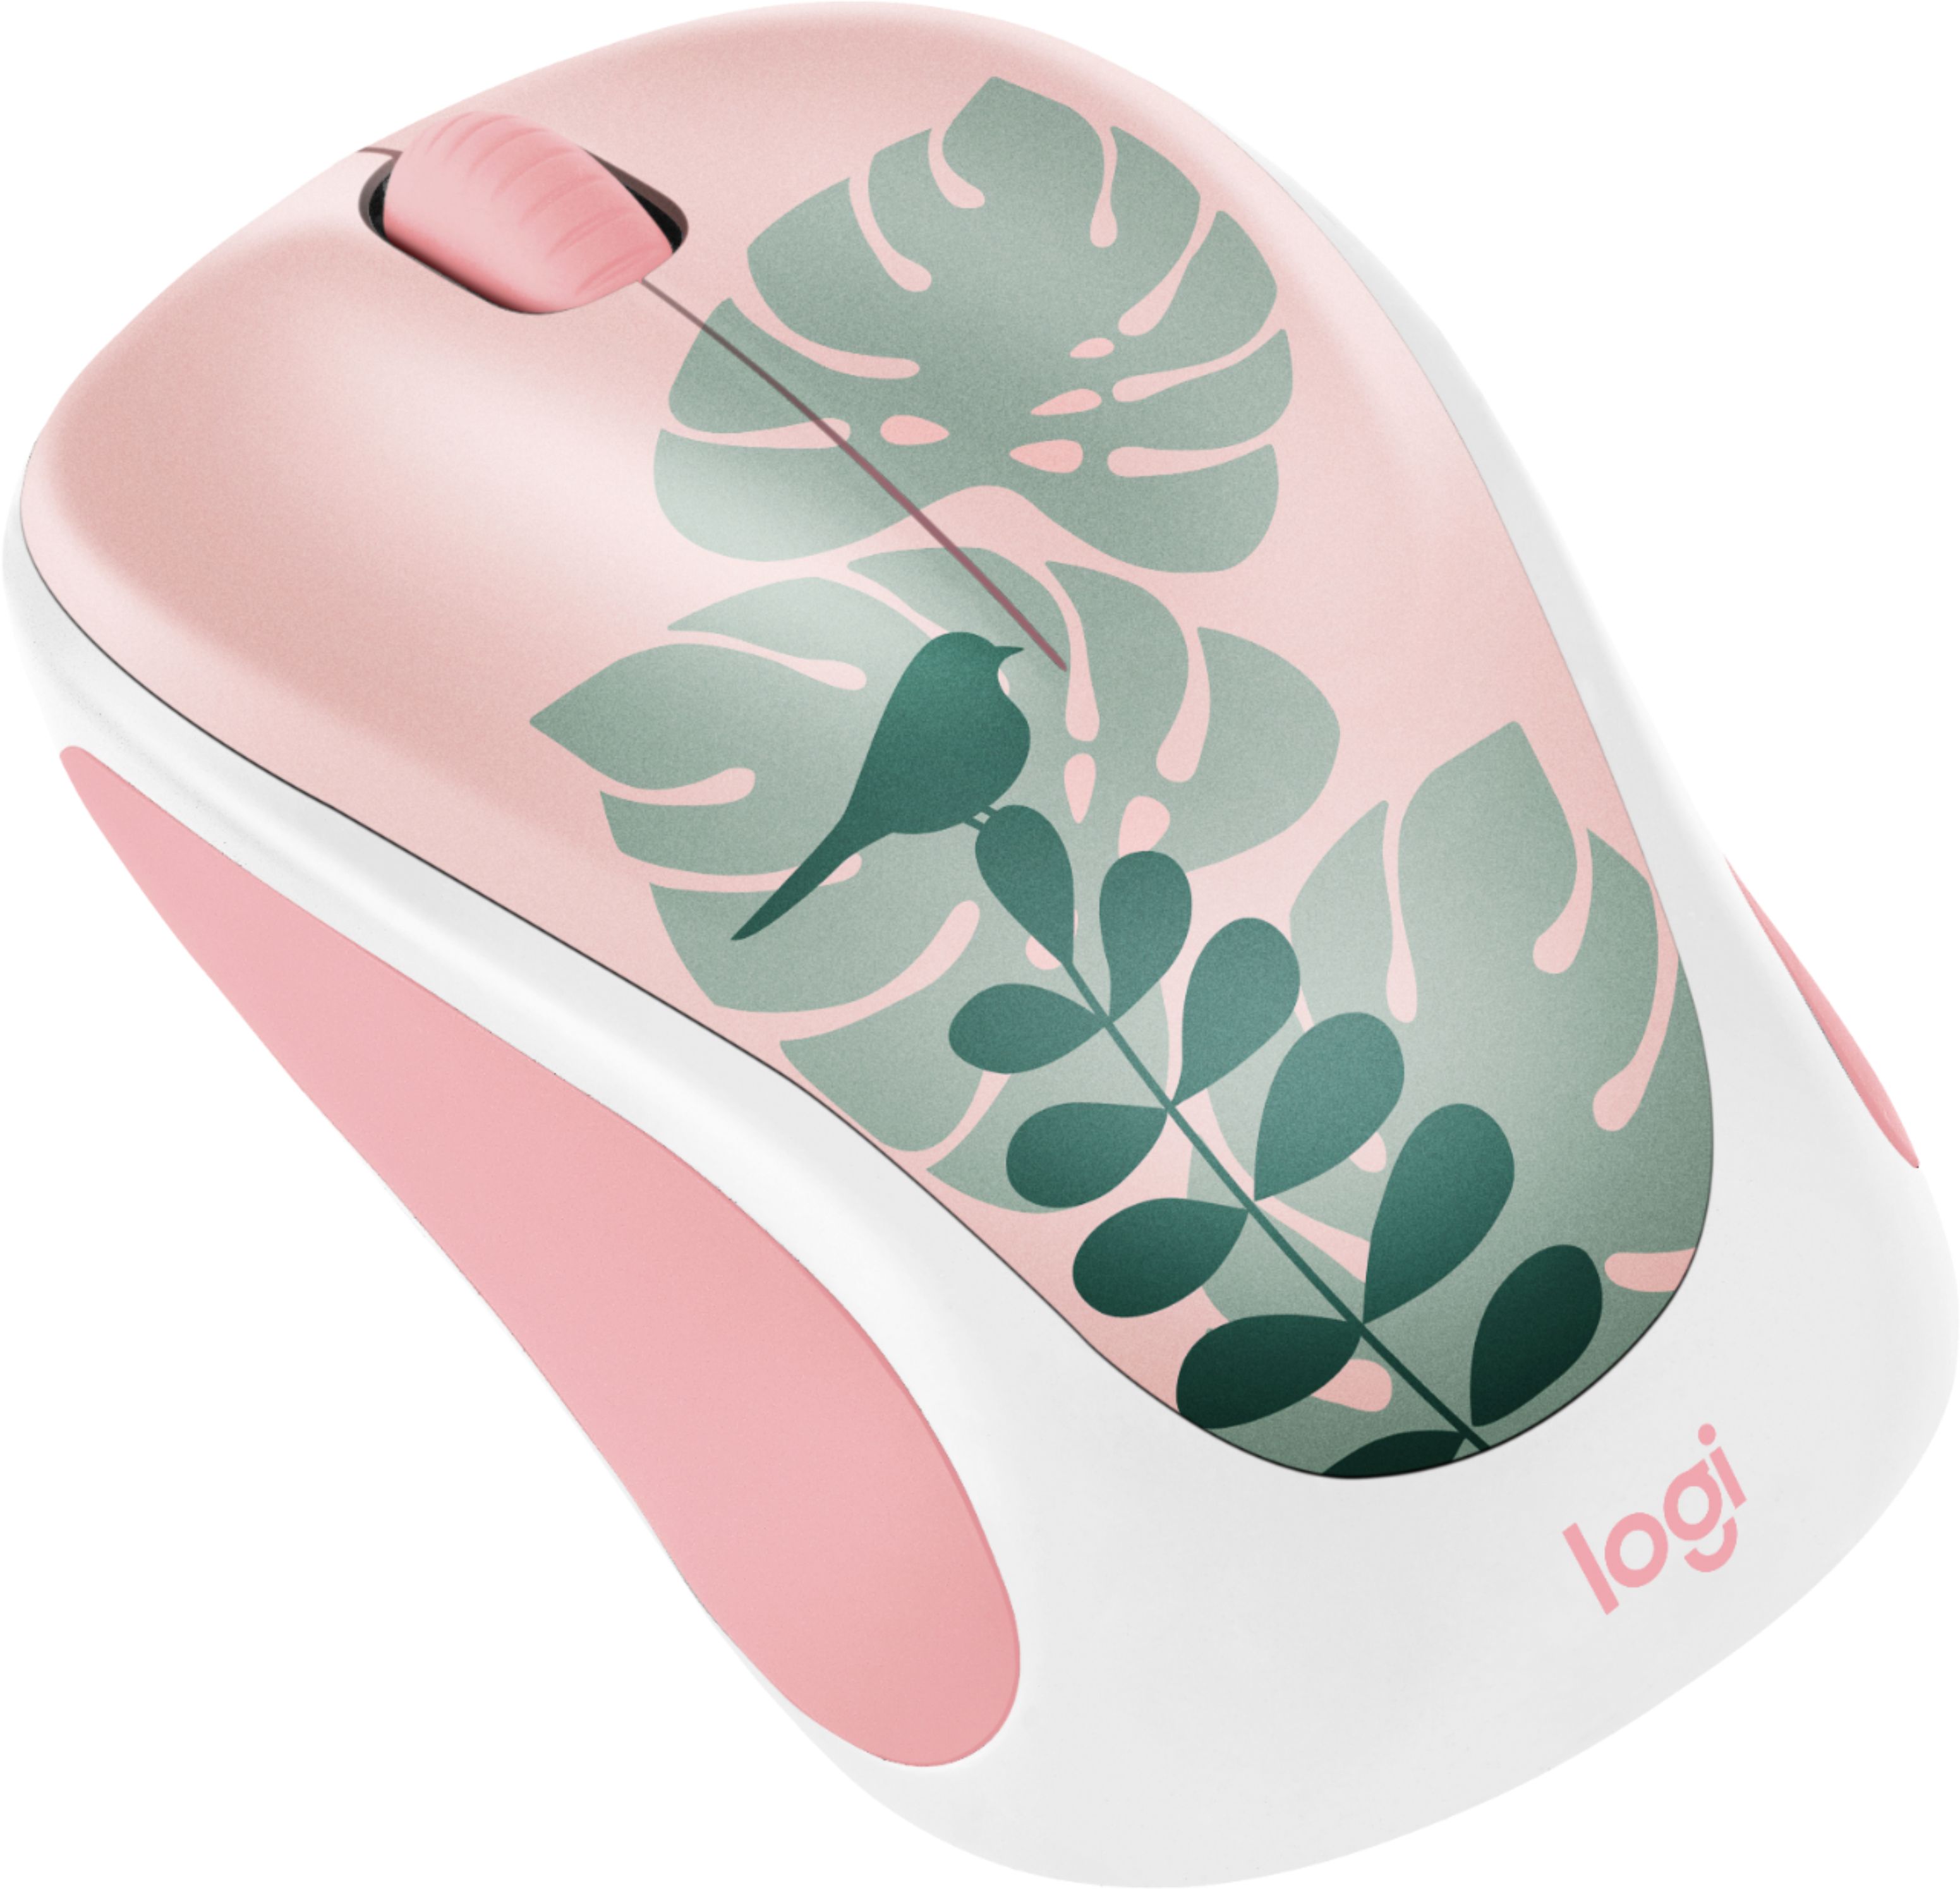 Angle View: Logitech - Design Collection Limited Edition Wireless 3-button Ambidextrous Mouse with Colorful Designs - Chirpy Bird